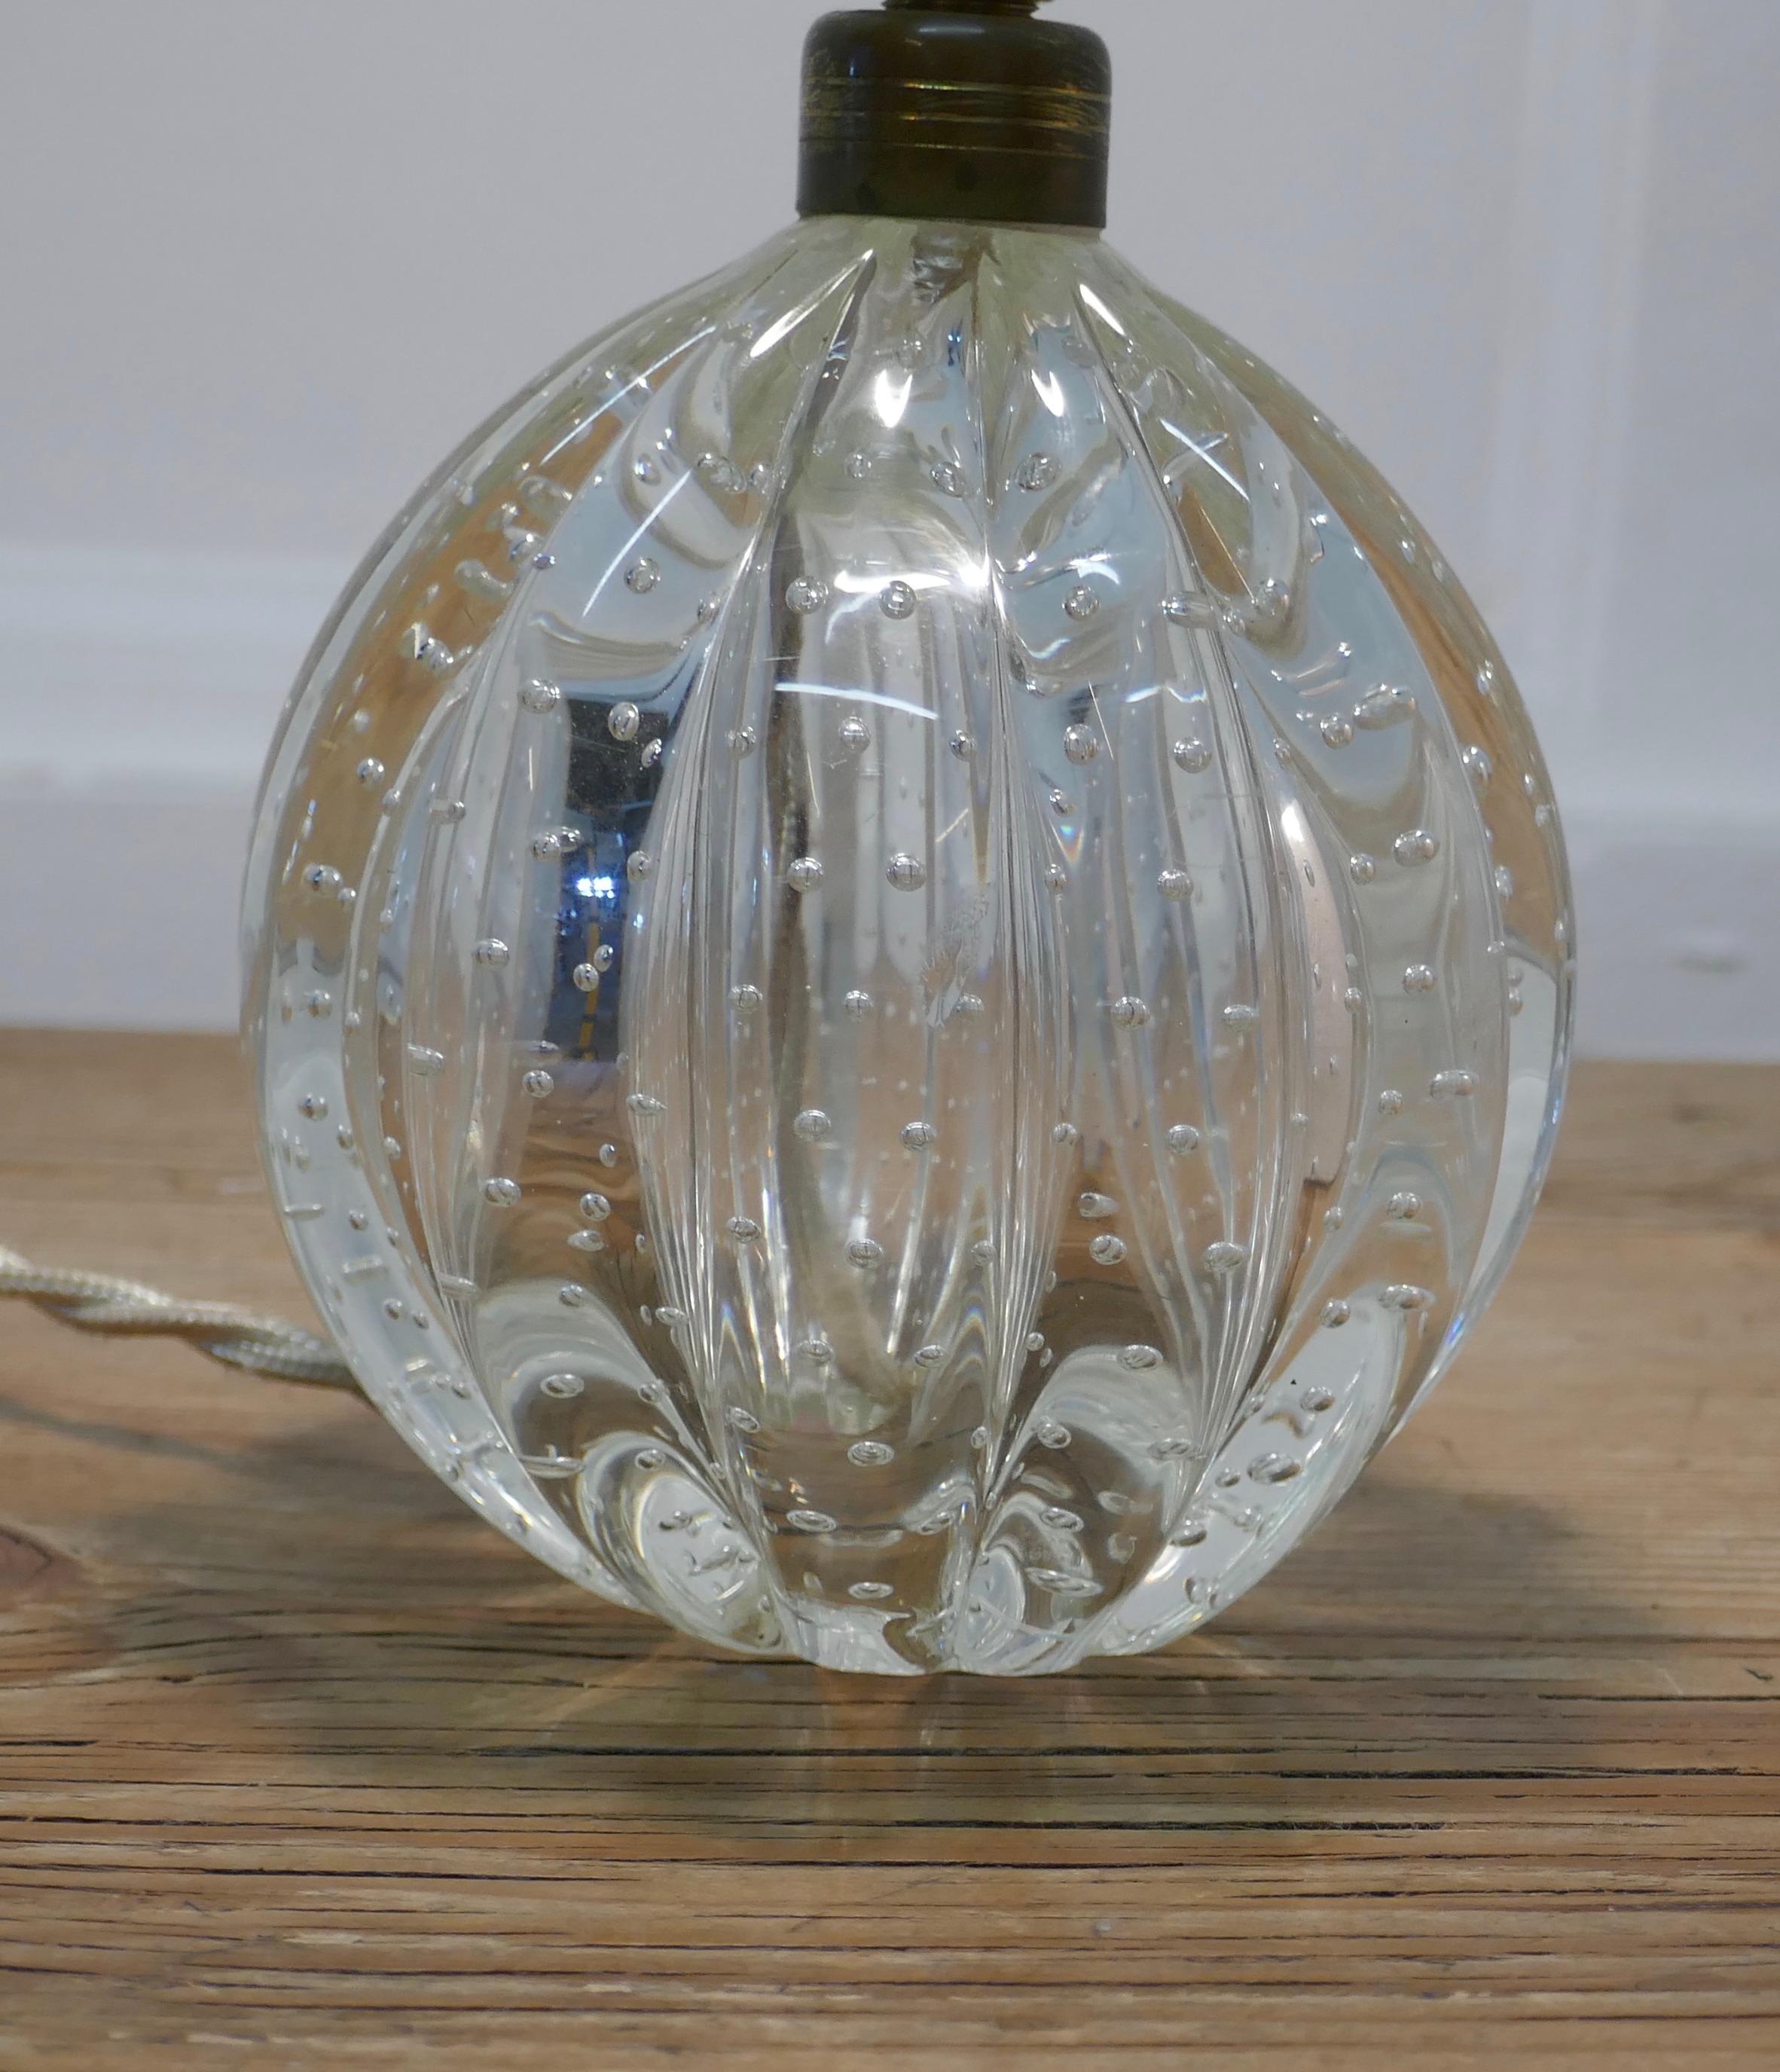 Superb Murano clear glass lamp, with controlled bubbles

A lovely piece of Murano, the original Murano label is very worn but still visible, the lamp has a delightful shape like a Cantaloupe Mellon with controlled bubble decoration
The lamp is